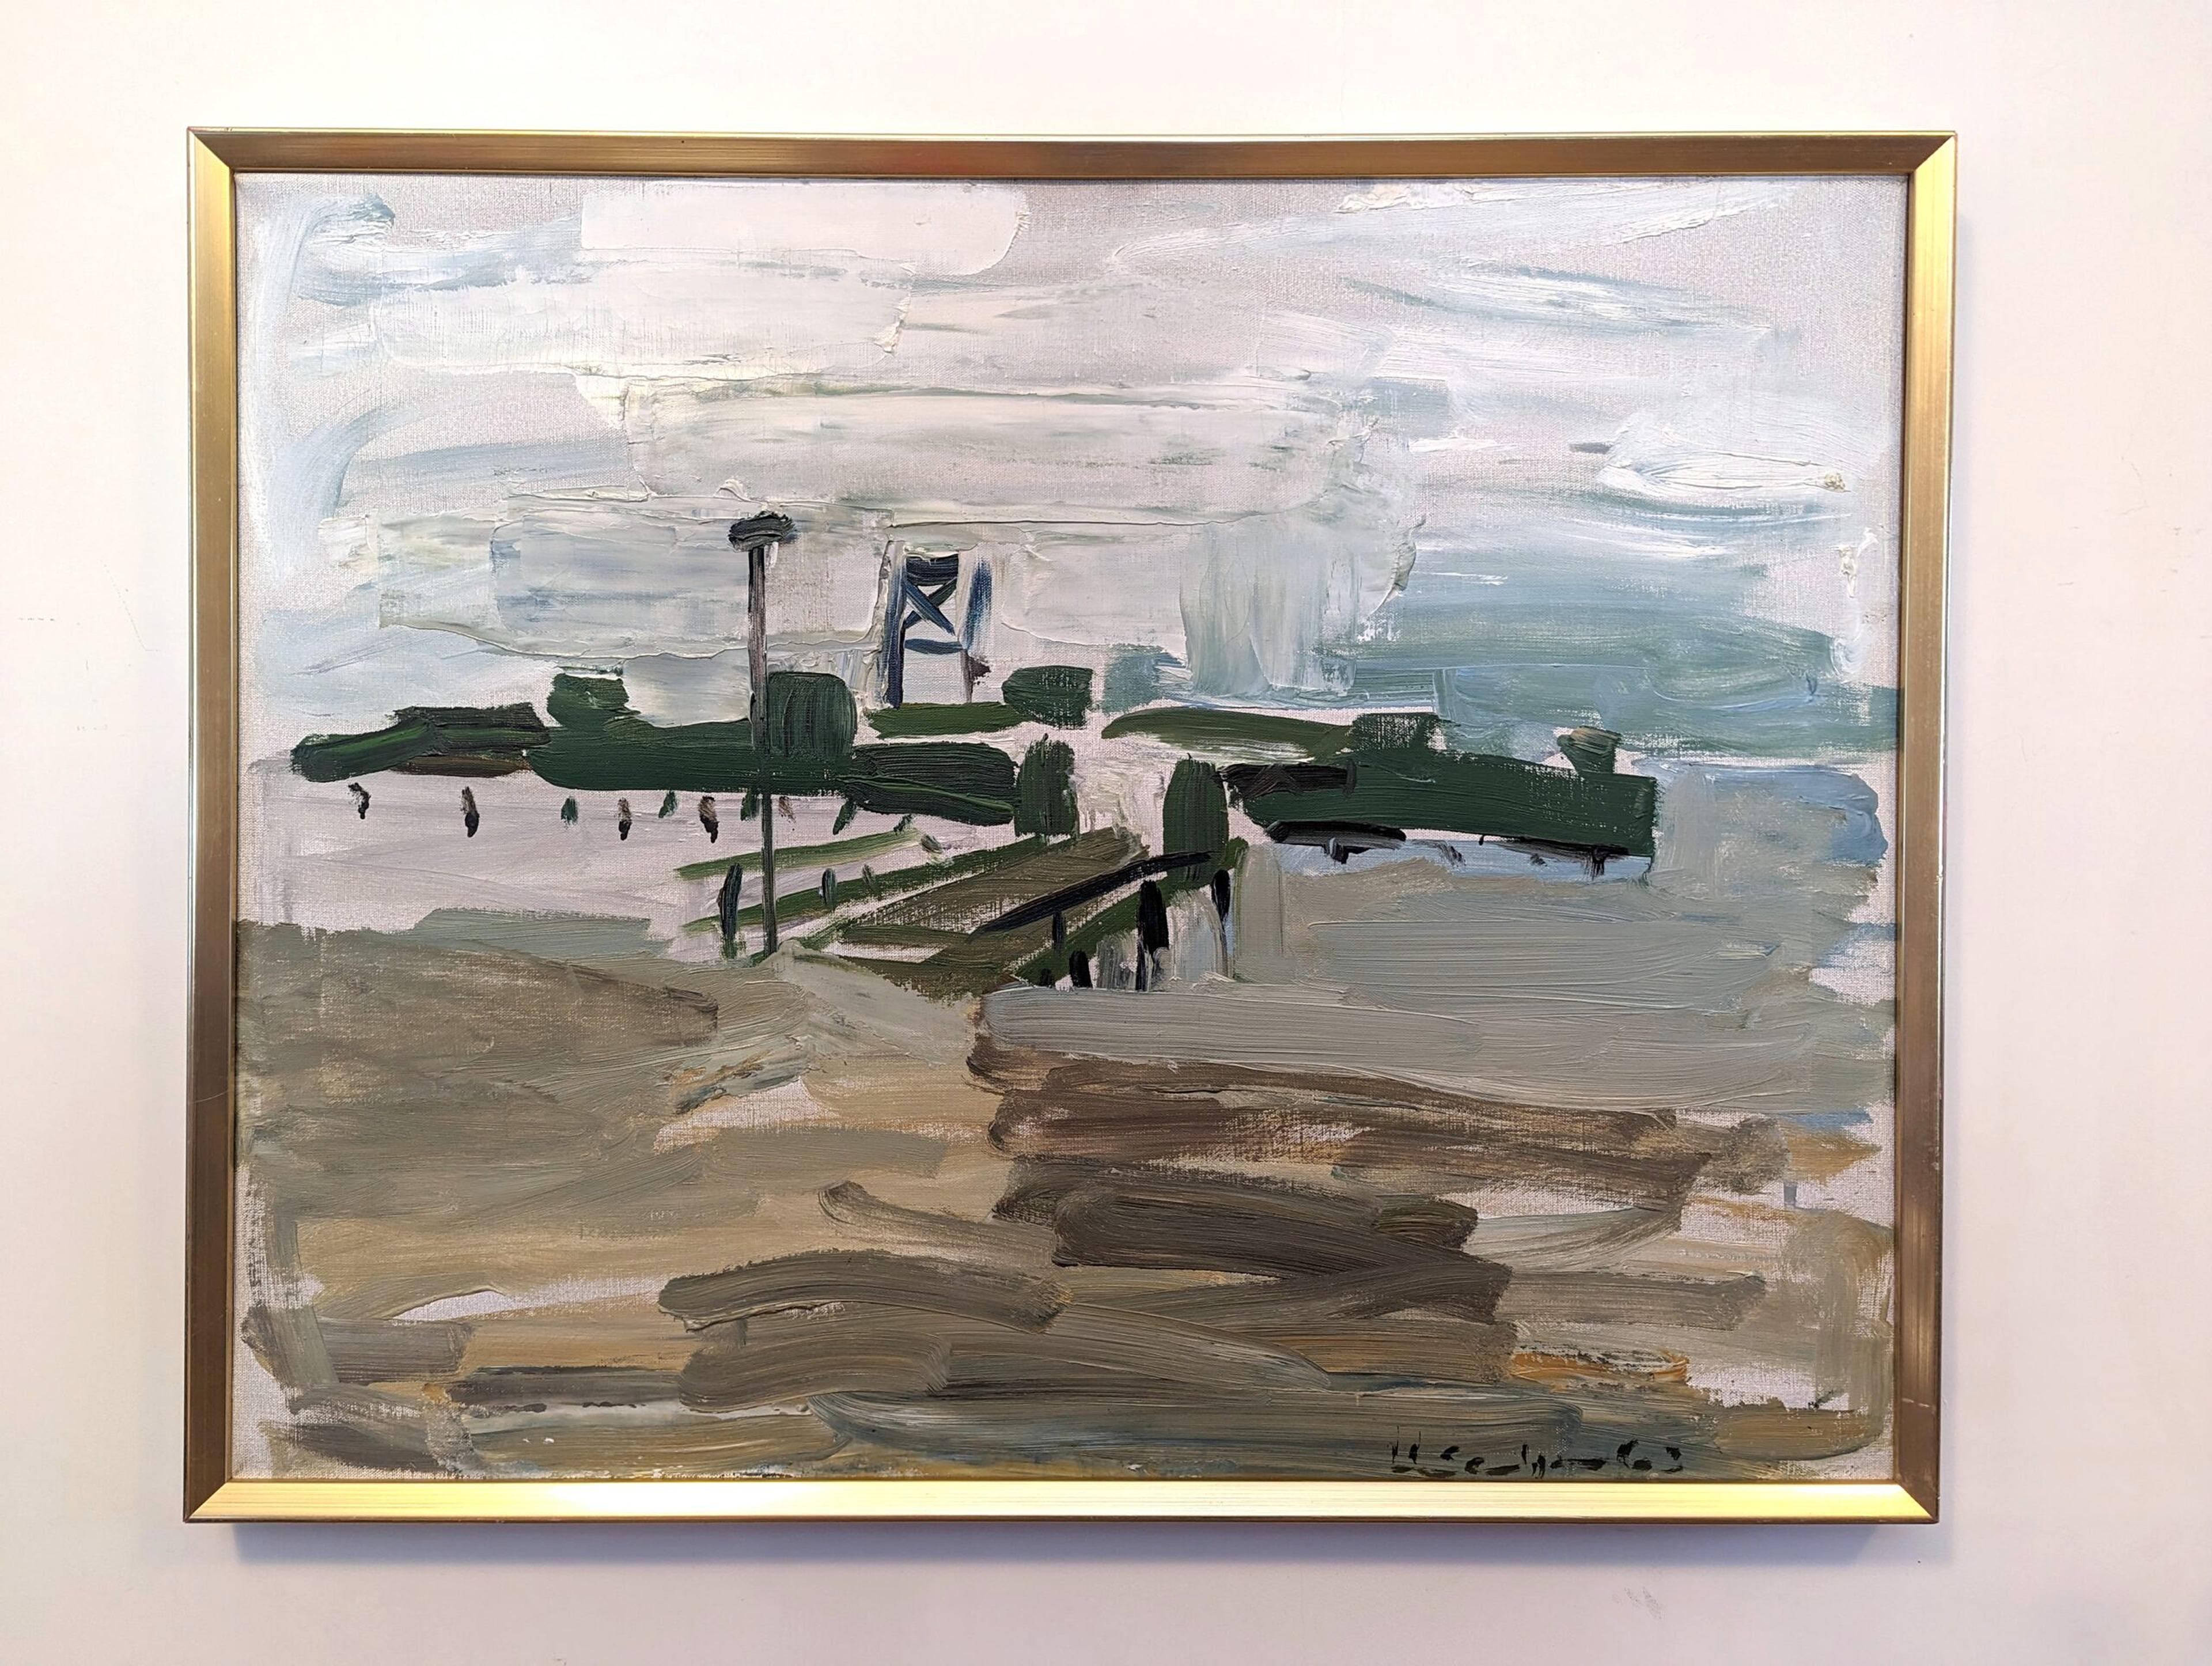 THE GREEN JETTY
Size: 60 x 75.5 cm (including frame)
Oil on Canvas 

A very well executed semi abstract mid century modernist composition, painted in oil onto canvas and dated 63.

Despite its semi abstract composition, we can just about make out